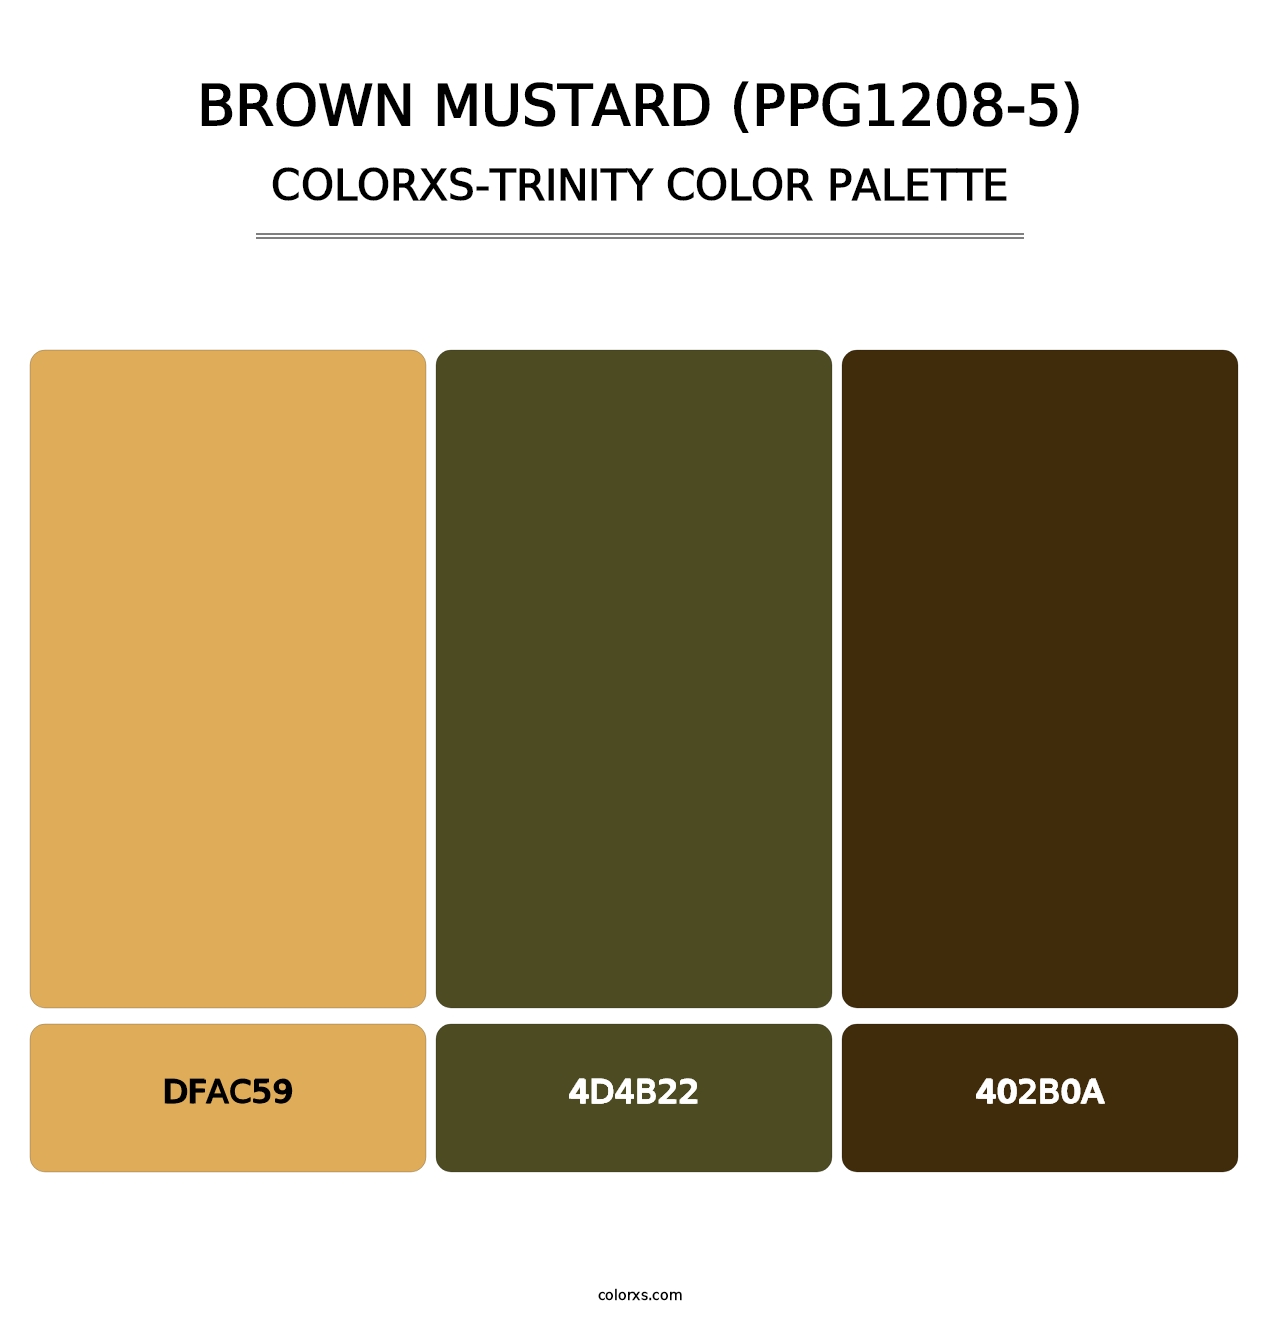 Brown Mustard (PPG1208-5) - Colorxs Trinity Palette